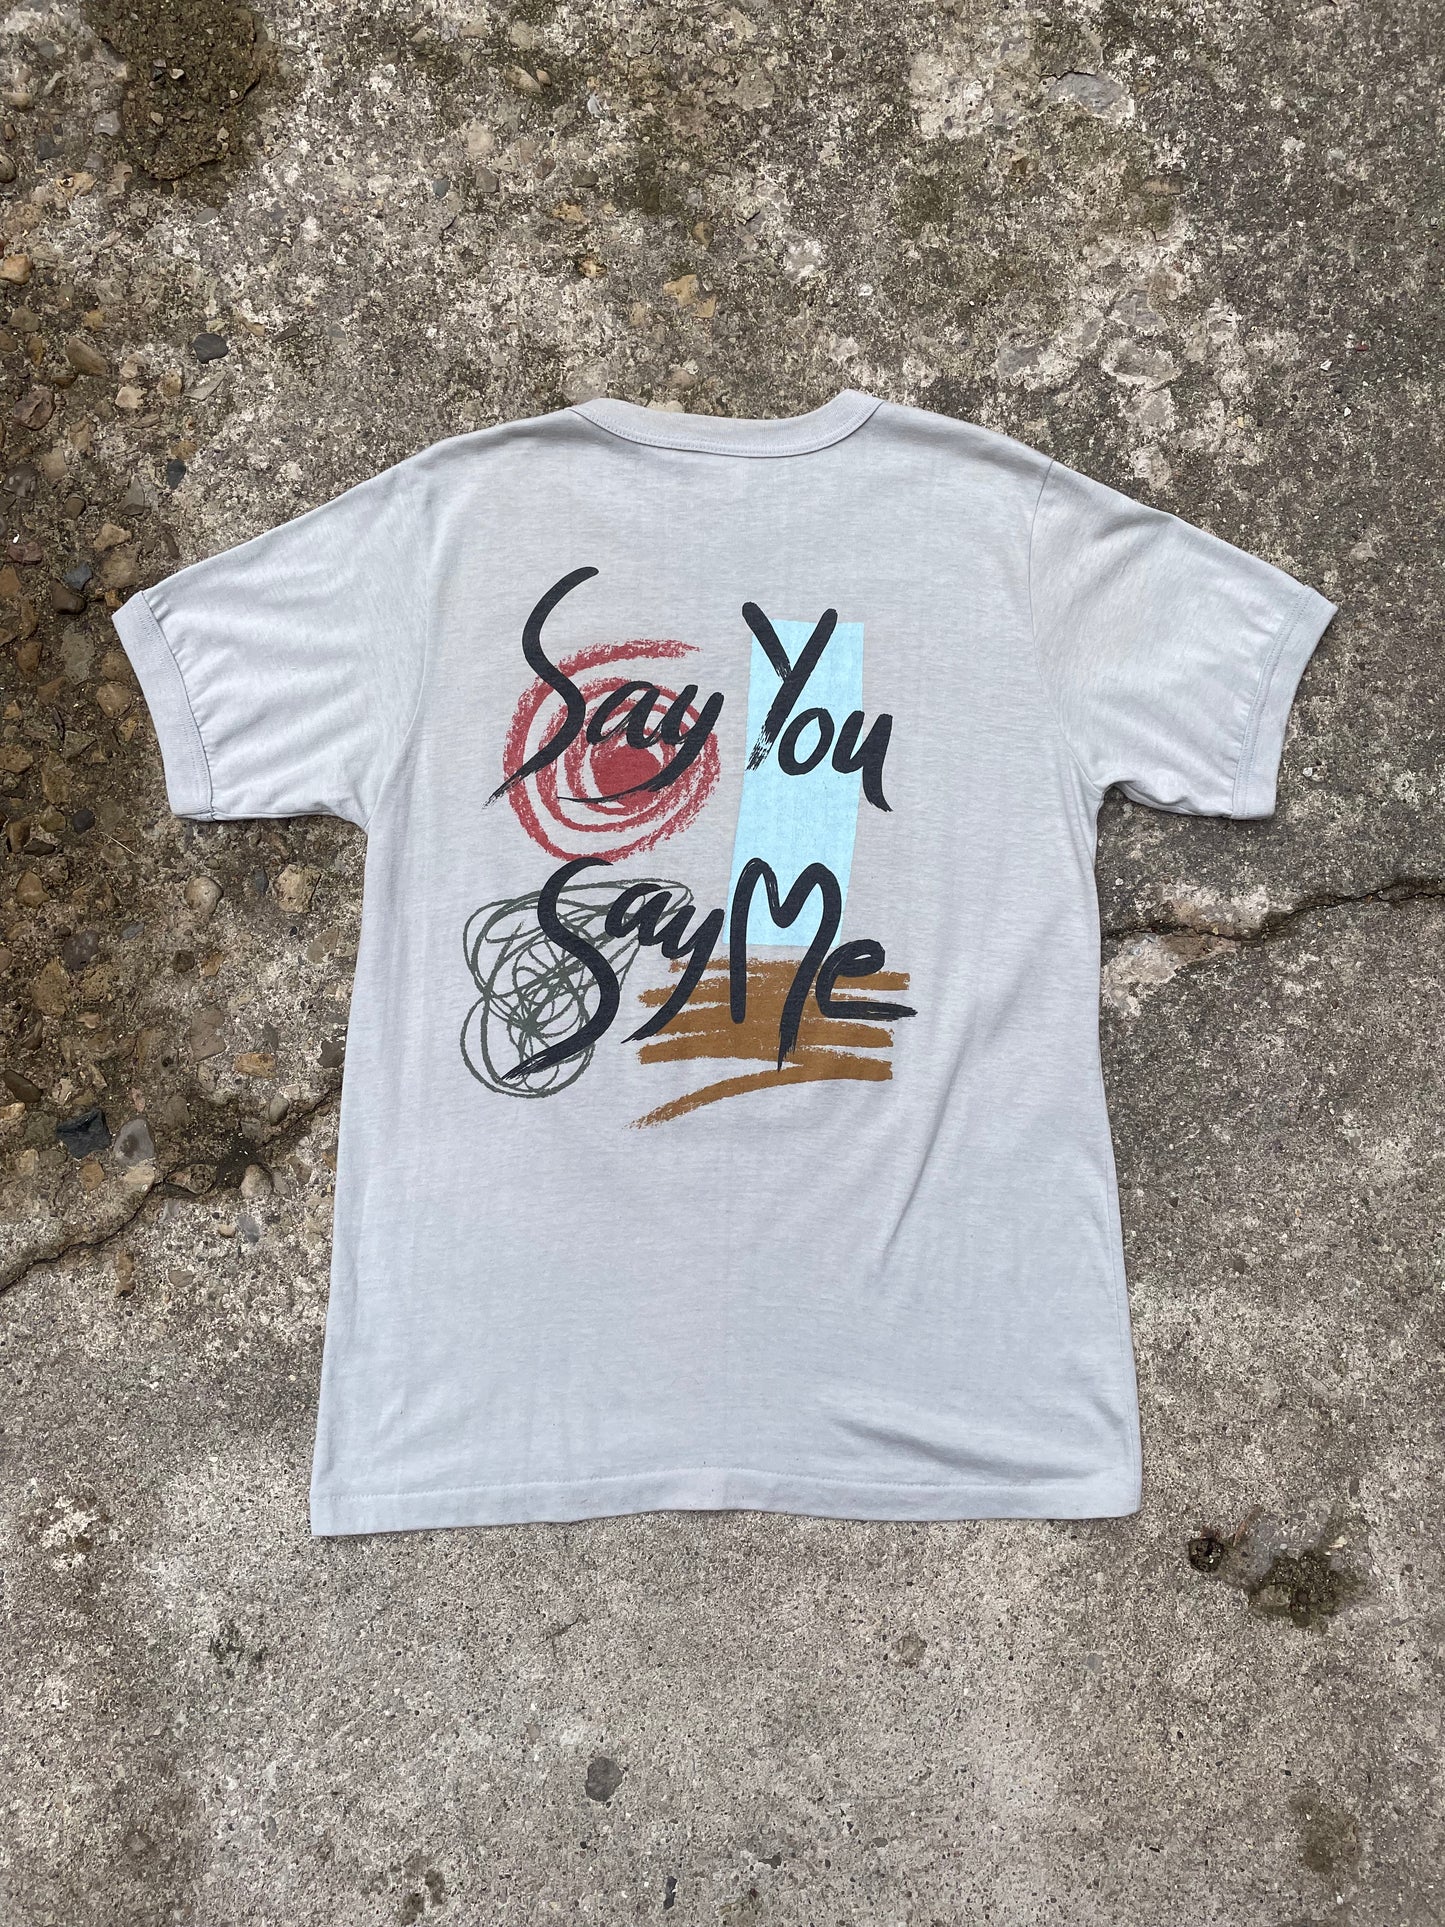 1986 Lionel Richie 'Say You Say Me' Ringer Band T-Shirt - L